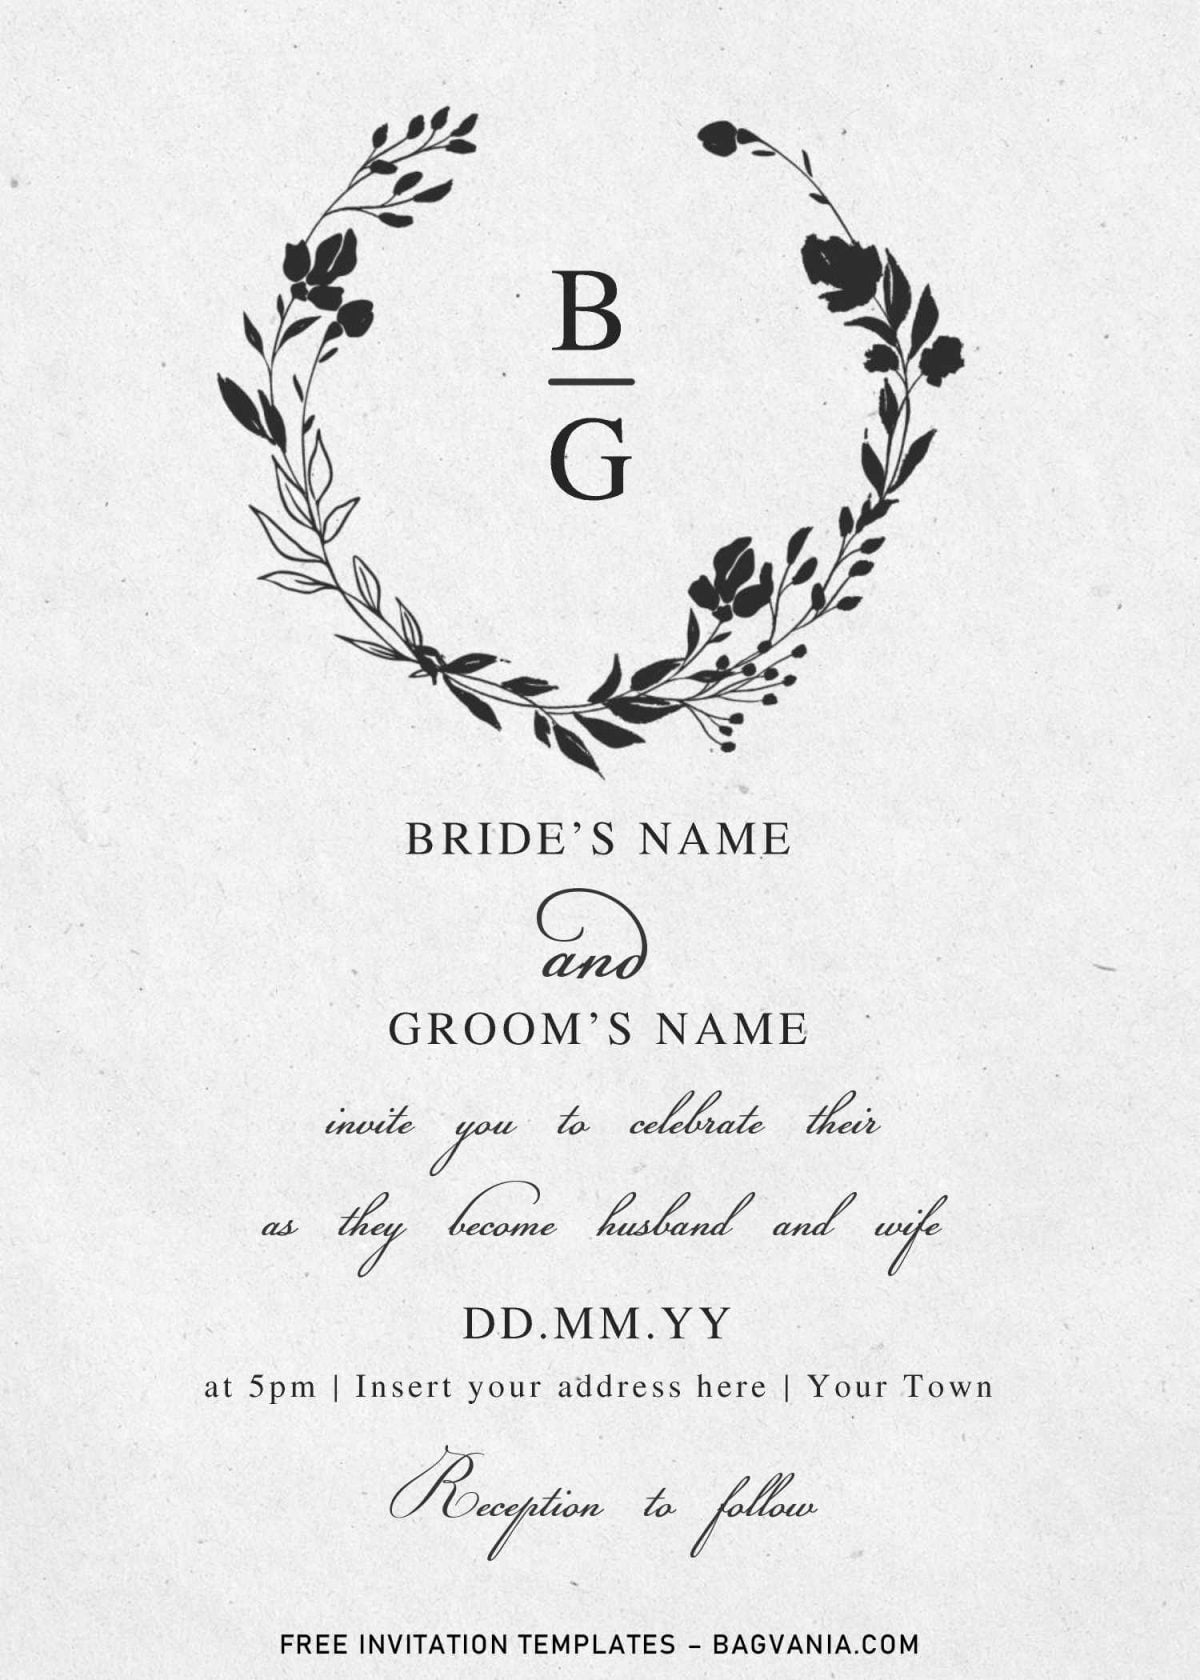 Free Floral Monogram Wedding Invitation Templates For Word and has vintage canvas background